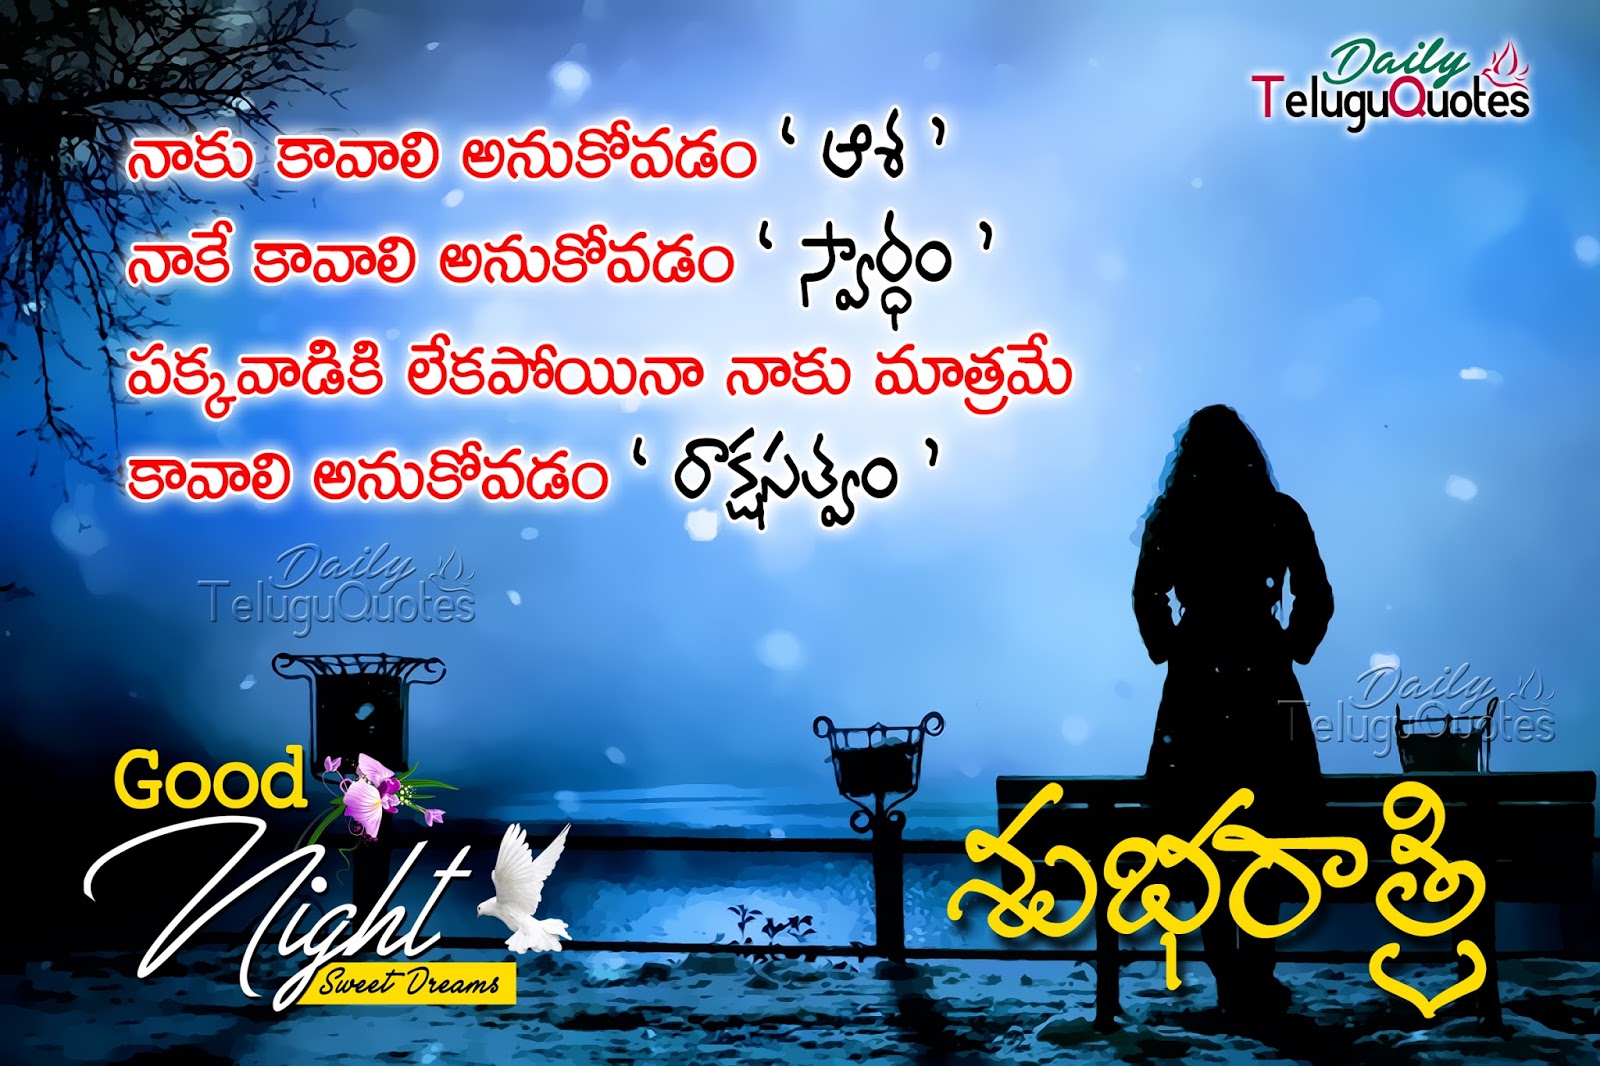 good night telugu quotes with life thoughts Nice heart touching good night quotes